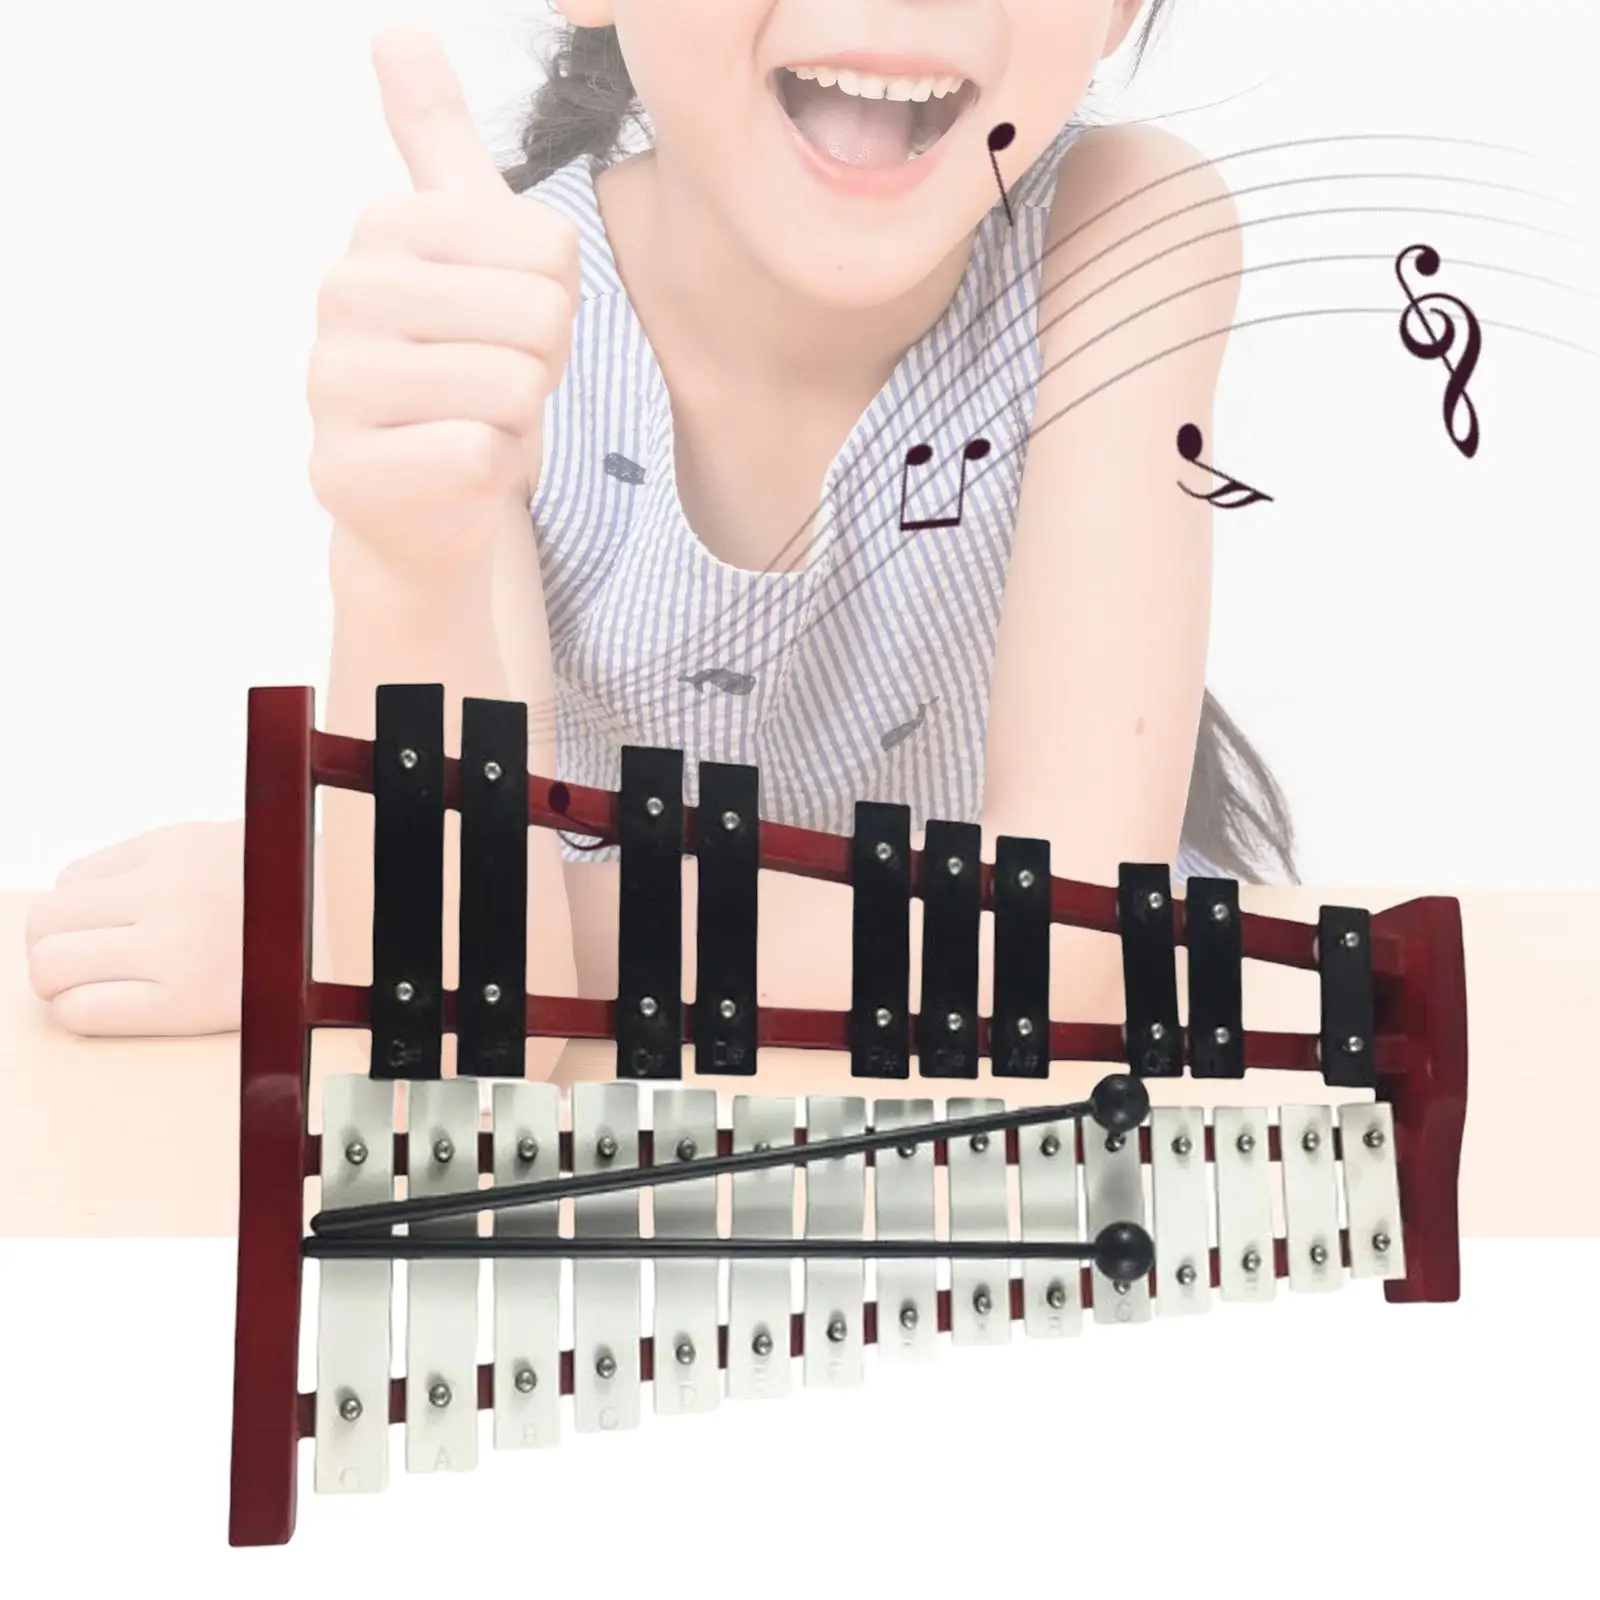 25 Key Glockenspiel Xylophone Exquisite Portable with Clearly Marked Notes Aluminum Bars